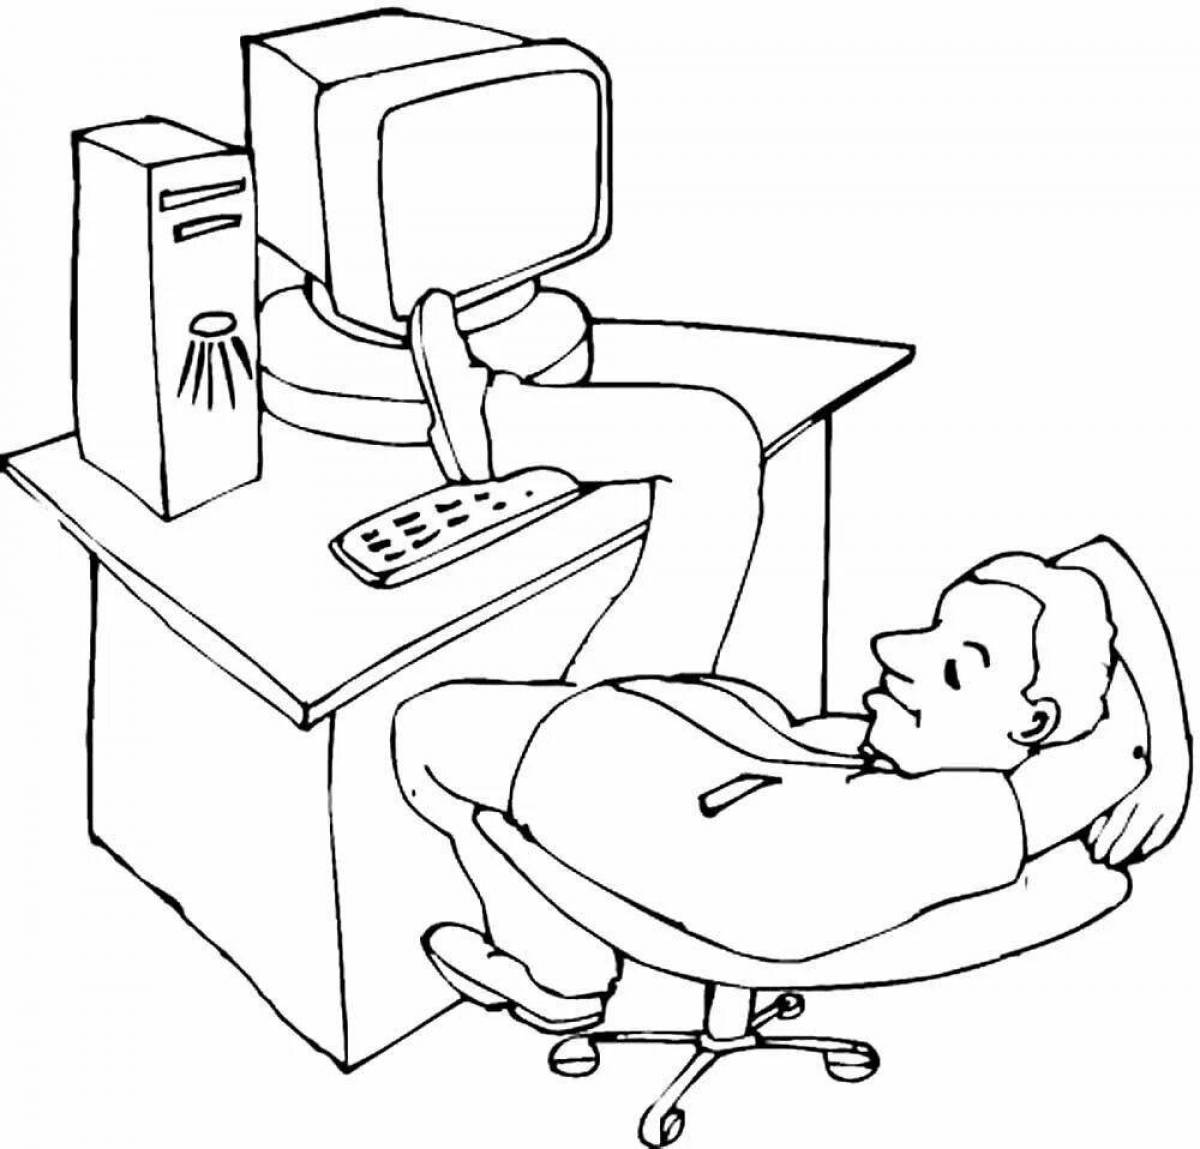 Color-luminous programmer coloring page